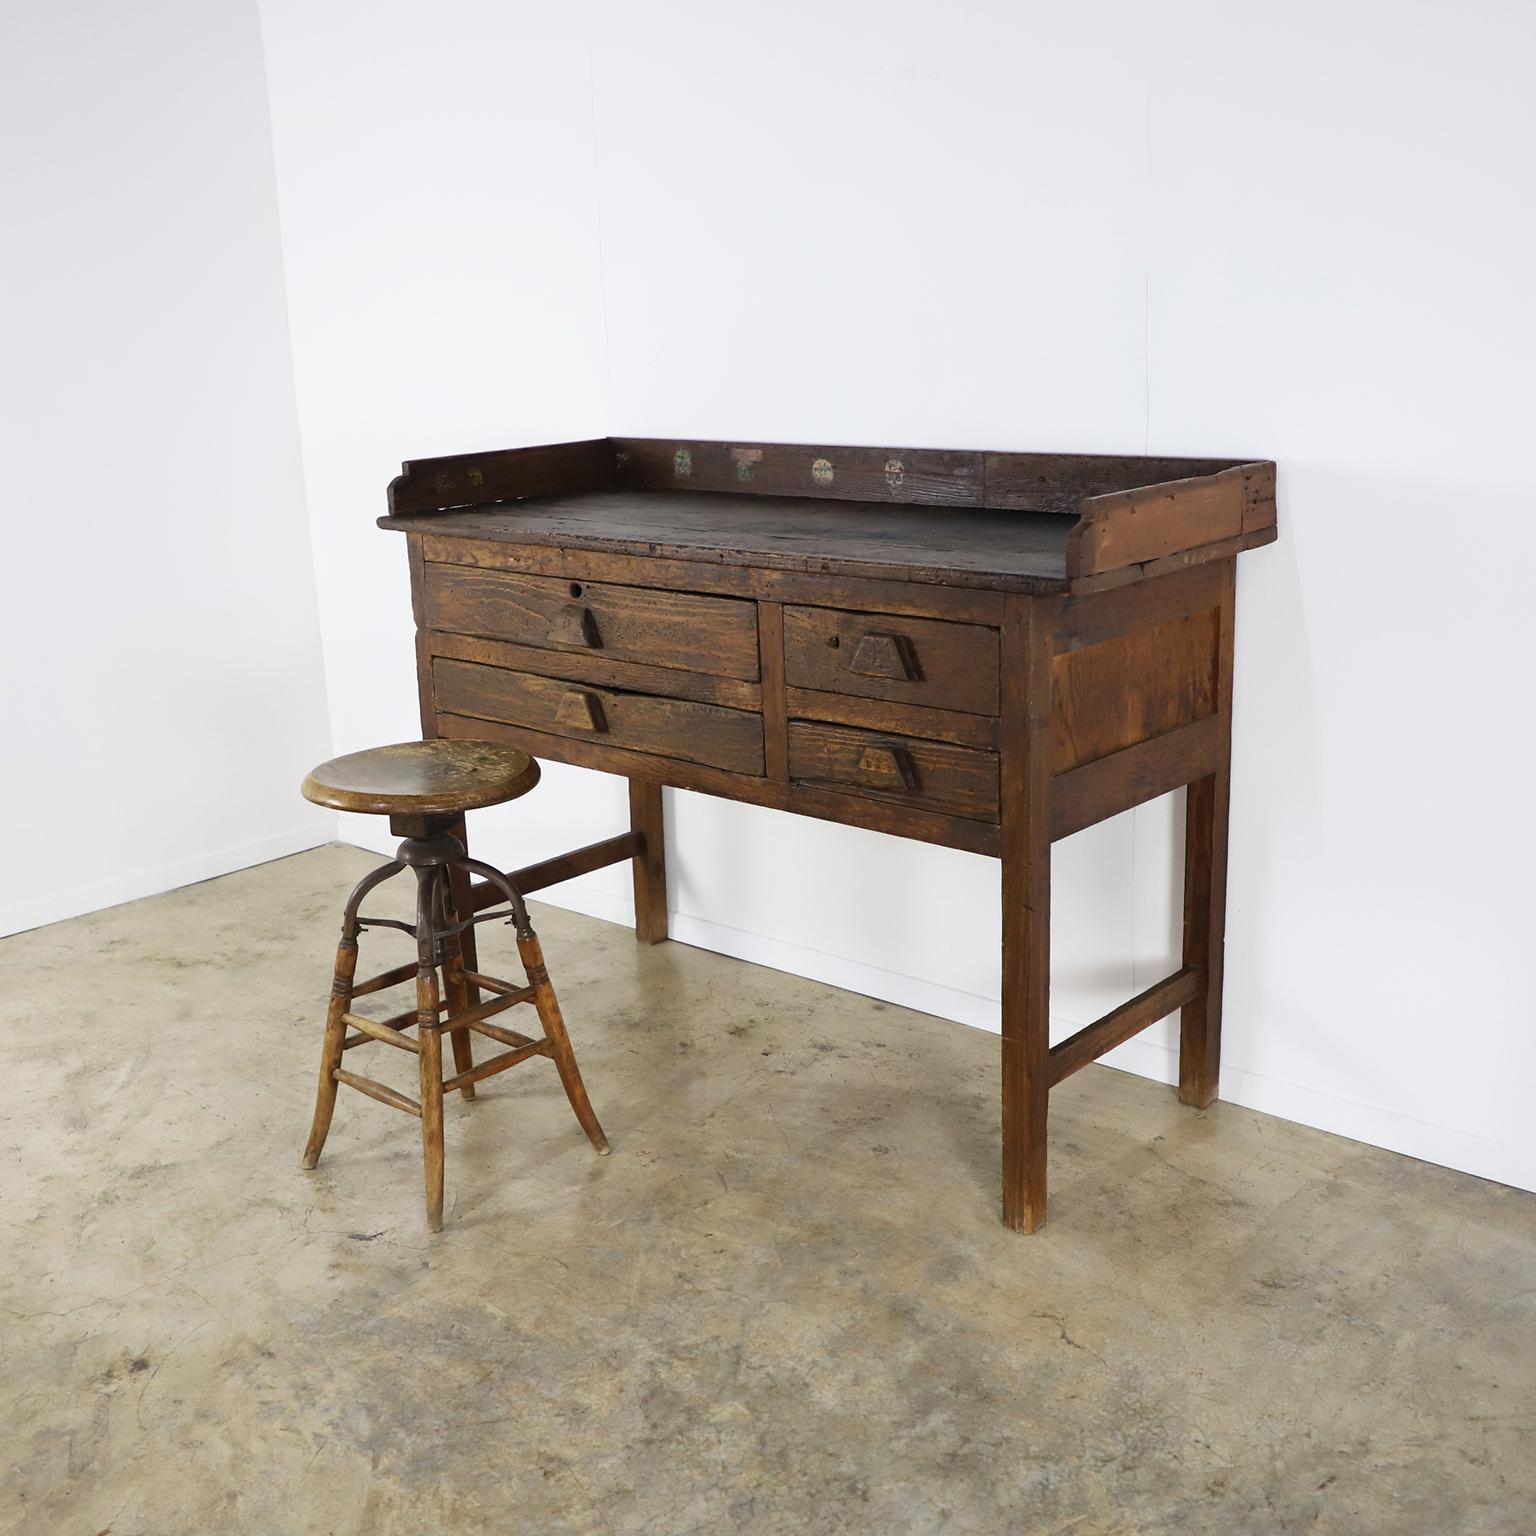 Circa 1930. We offer a most unique antique Mexican Industrial Jeweler's Bench Work Table with outstanding patina.

The stool is not included.